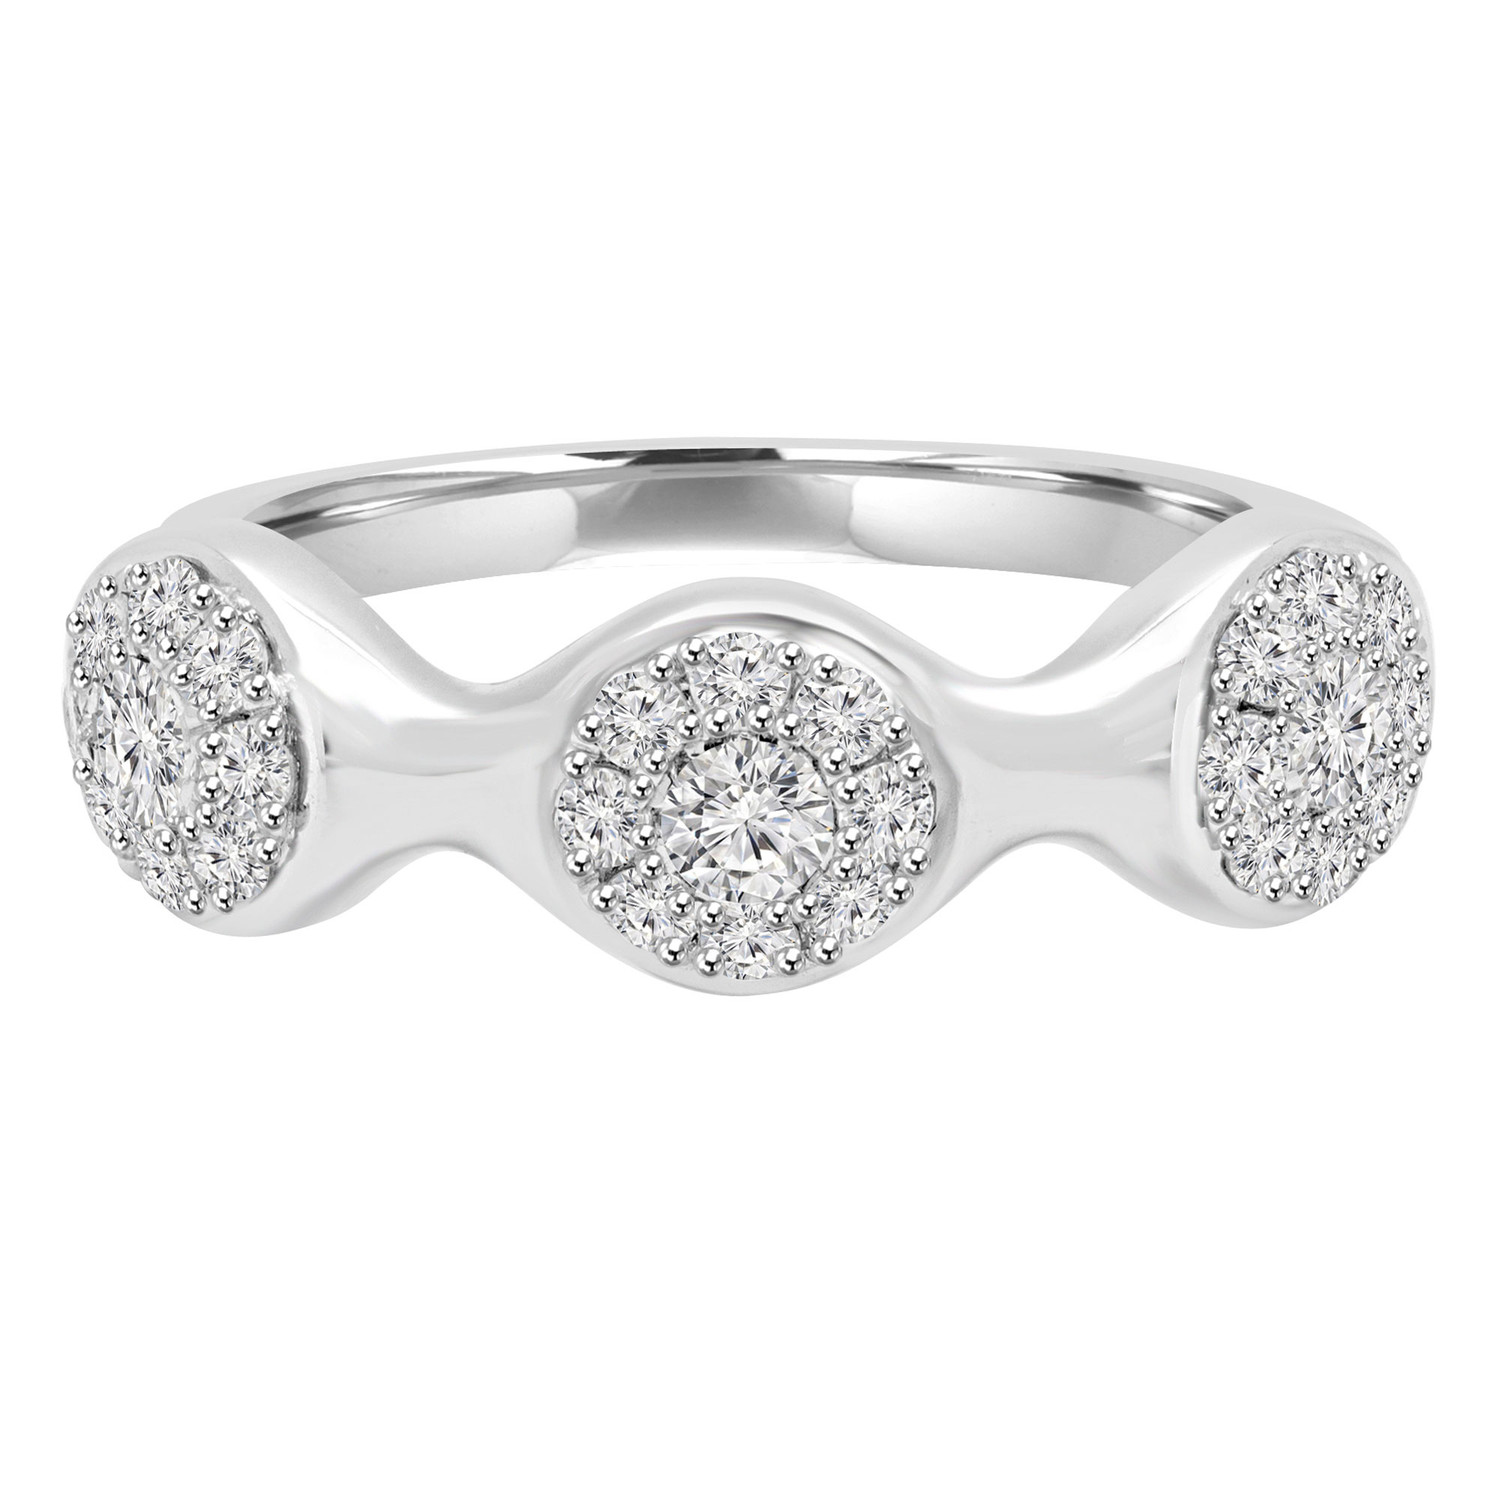 1/2 CTW Round Diamond Cluster Cocktail Ring in 18K White Gold (MD160282)